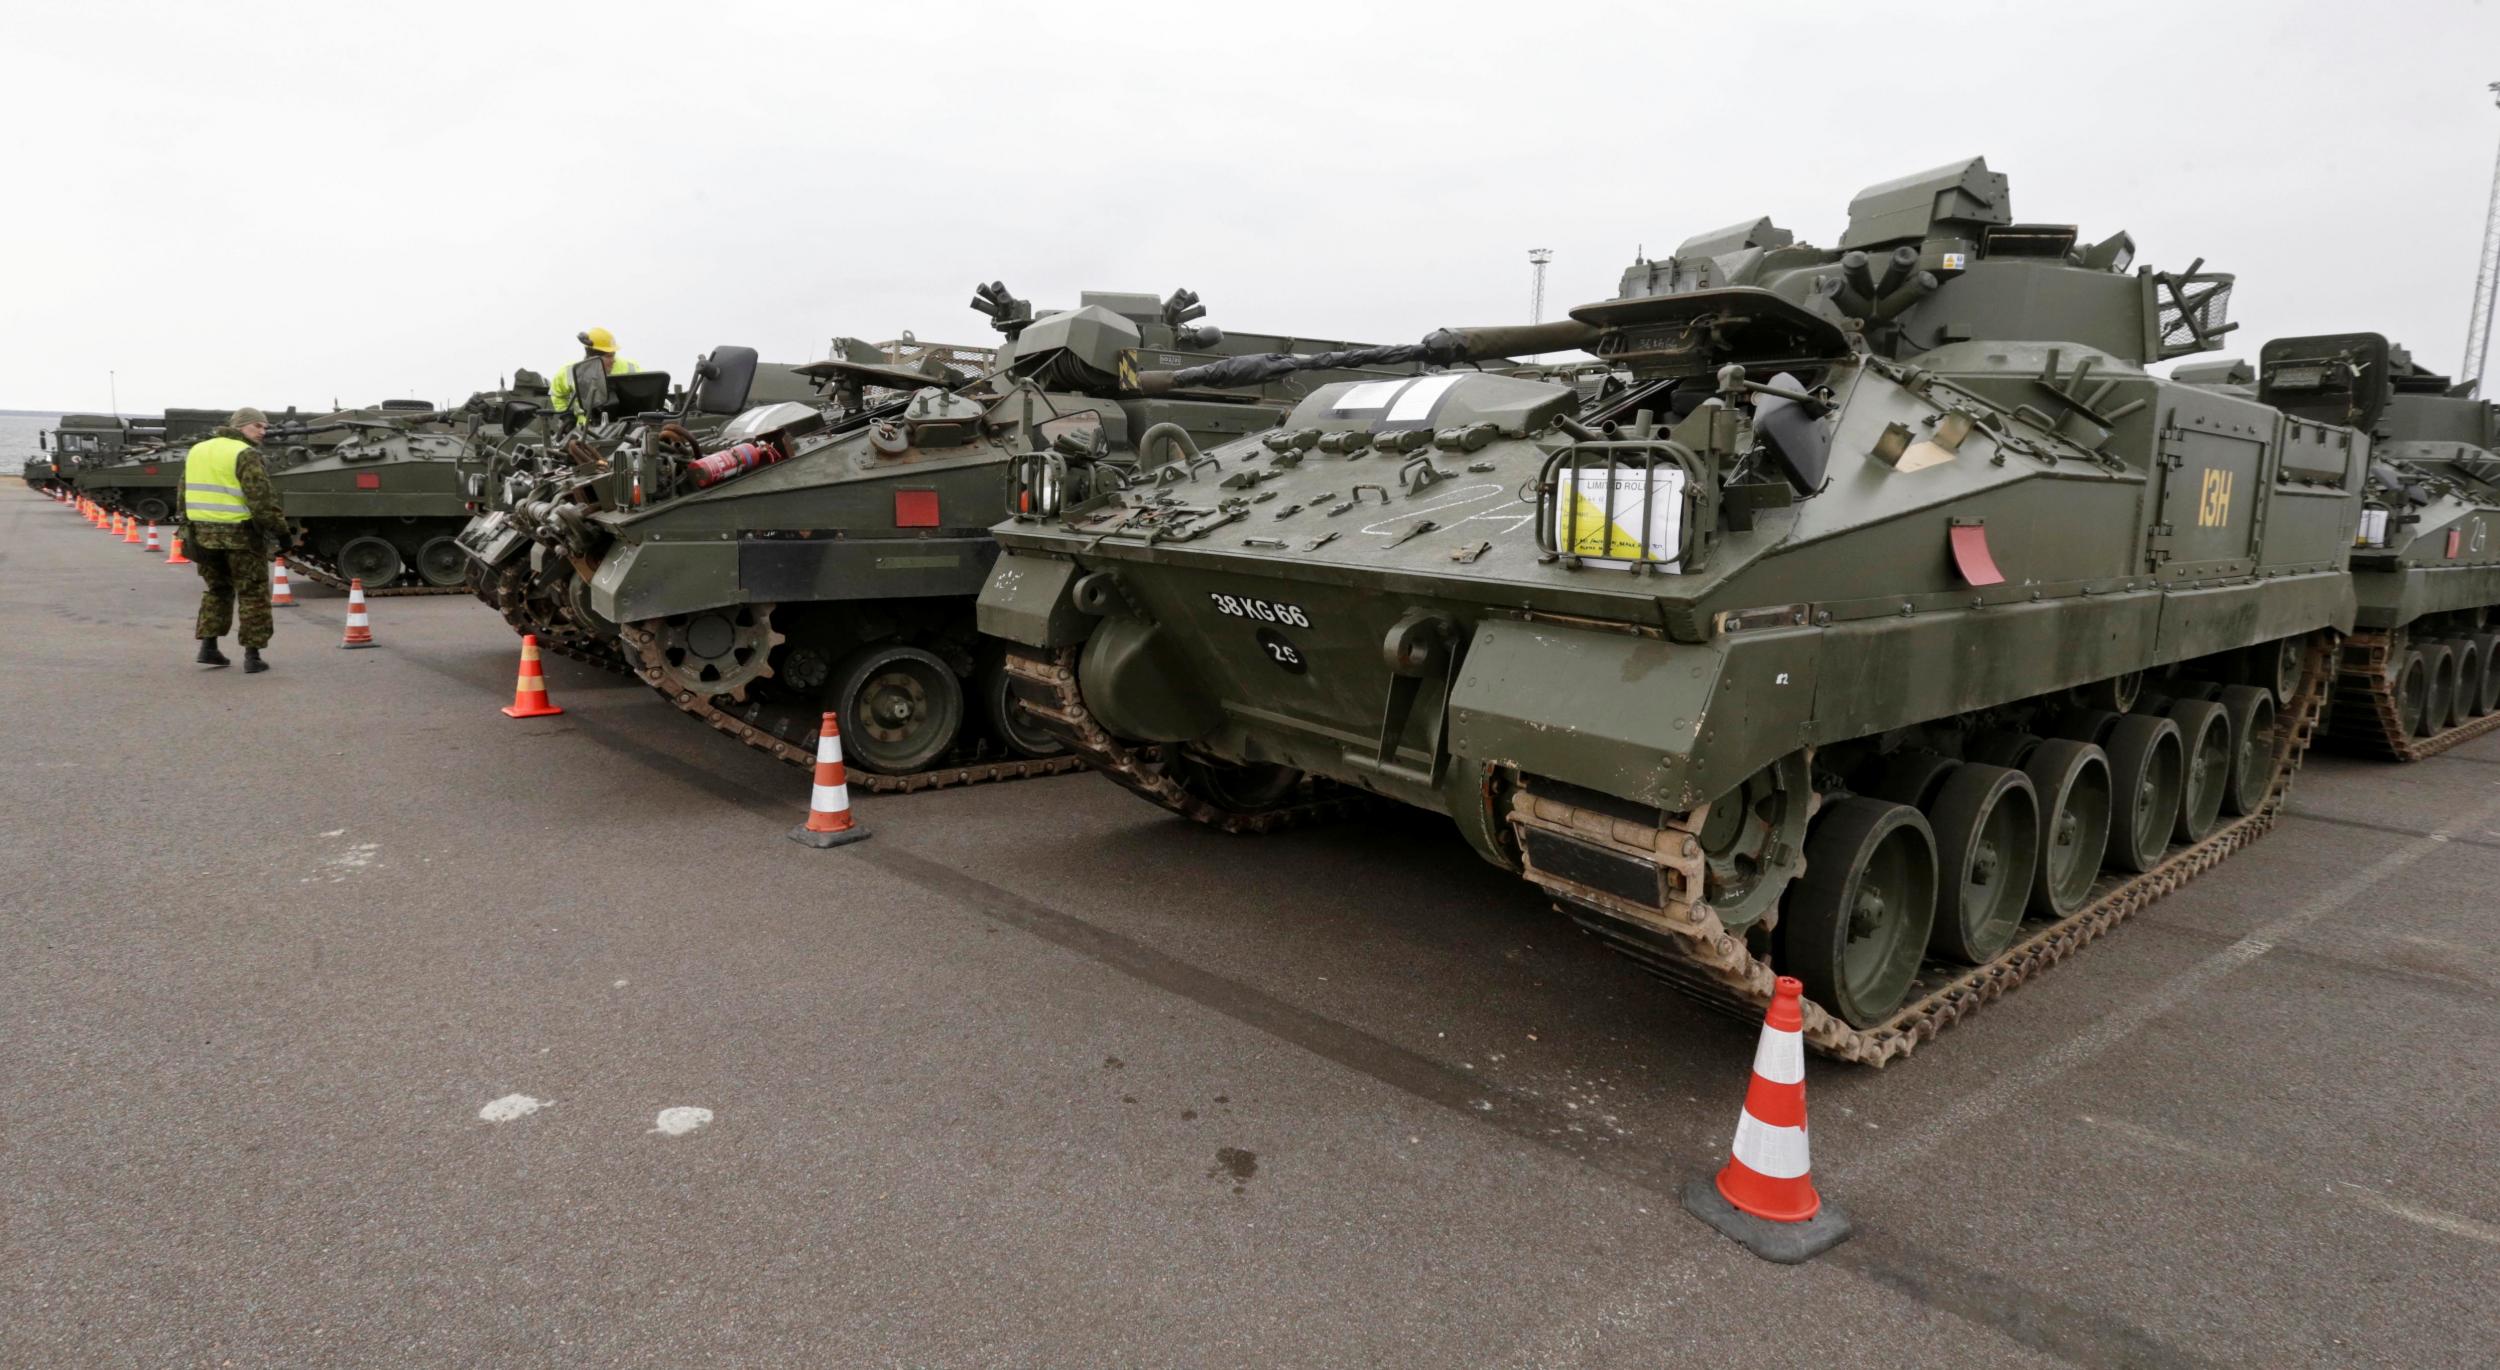 Warrior armoured fighting vehicles in Estonia are just one example of the UK's military contributions to the continent